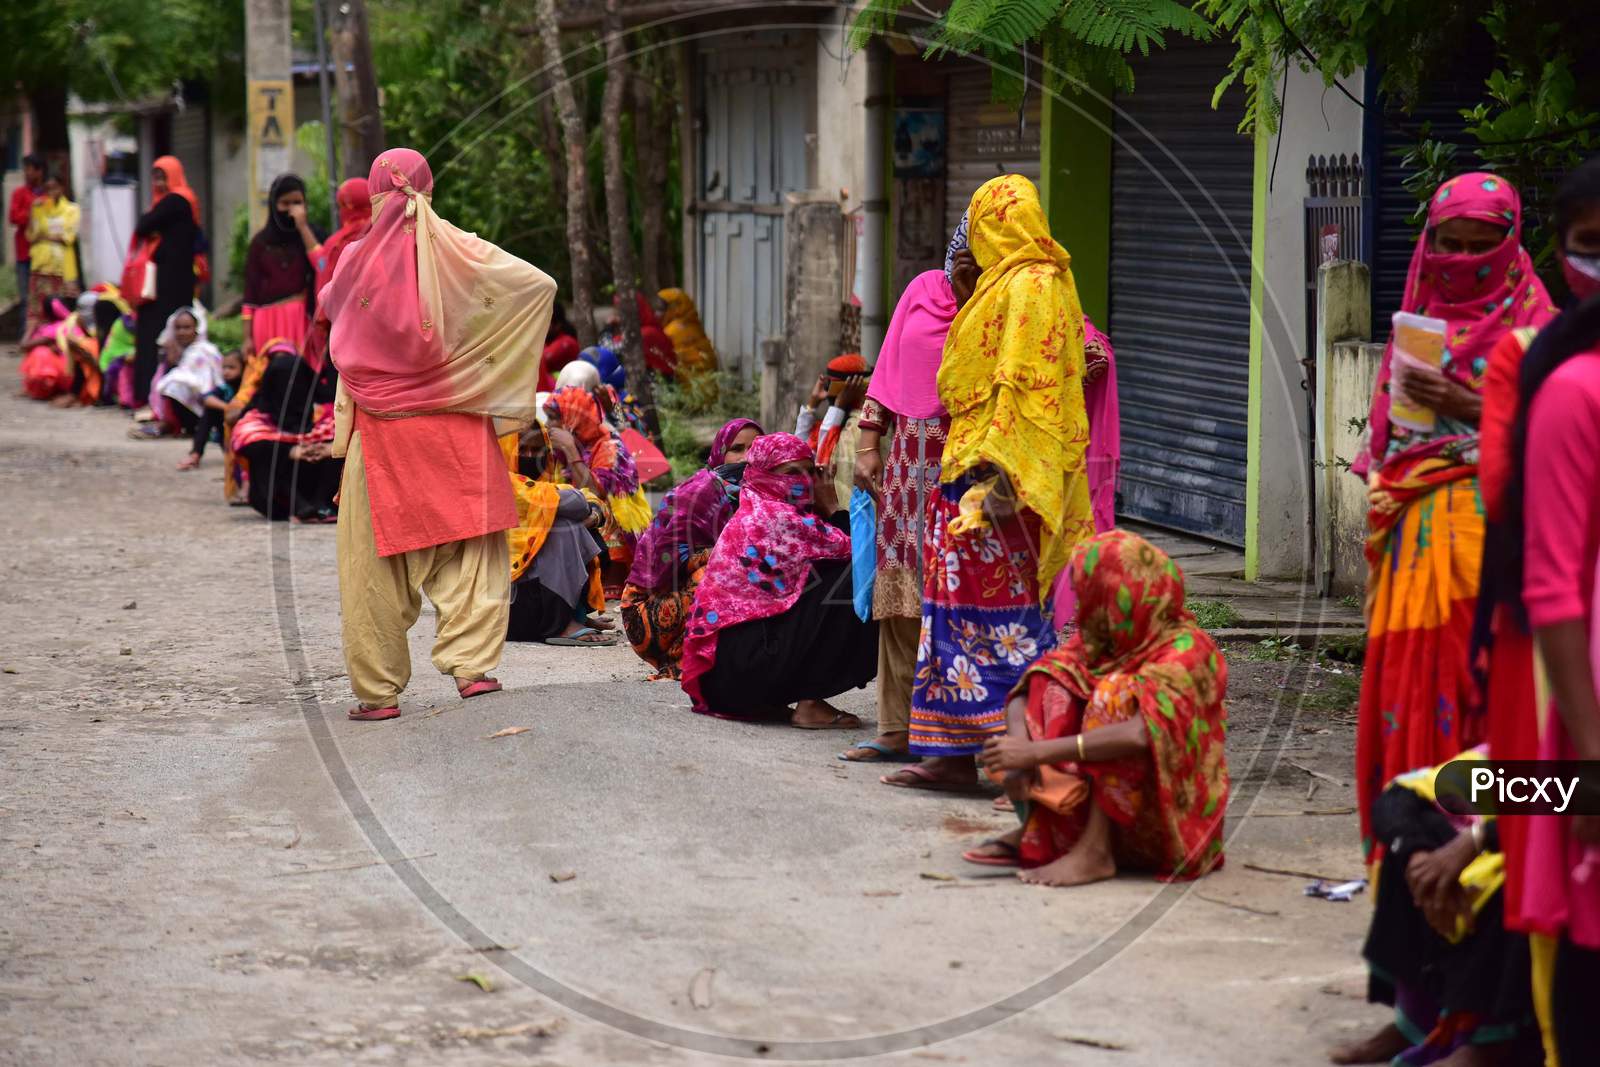 Women Wait For Their Turn To Collect 500 Indian Rupees  From A Bank'S Customer Service Point   During A Nationwide Lockdown In The Wake Of Corona virus (COVID-19) Pandemic,  In Nagaon District Of Assam On  Tuesday, April 21, 2020.